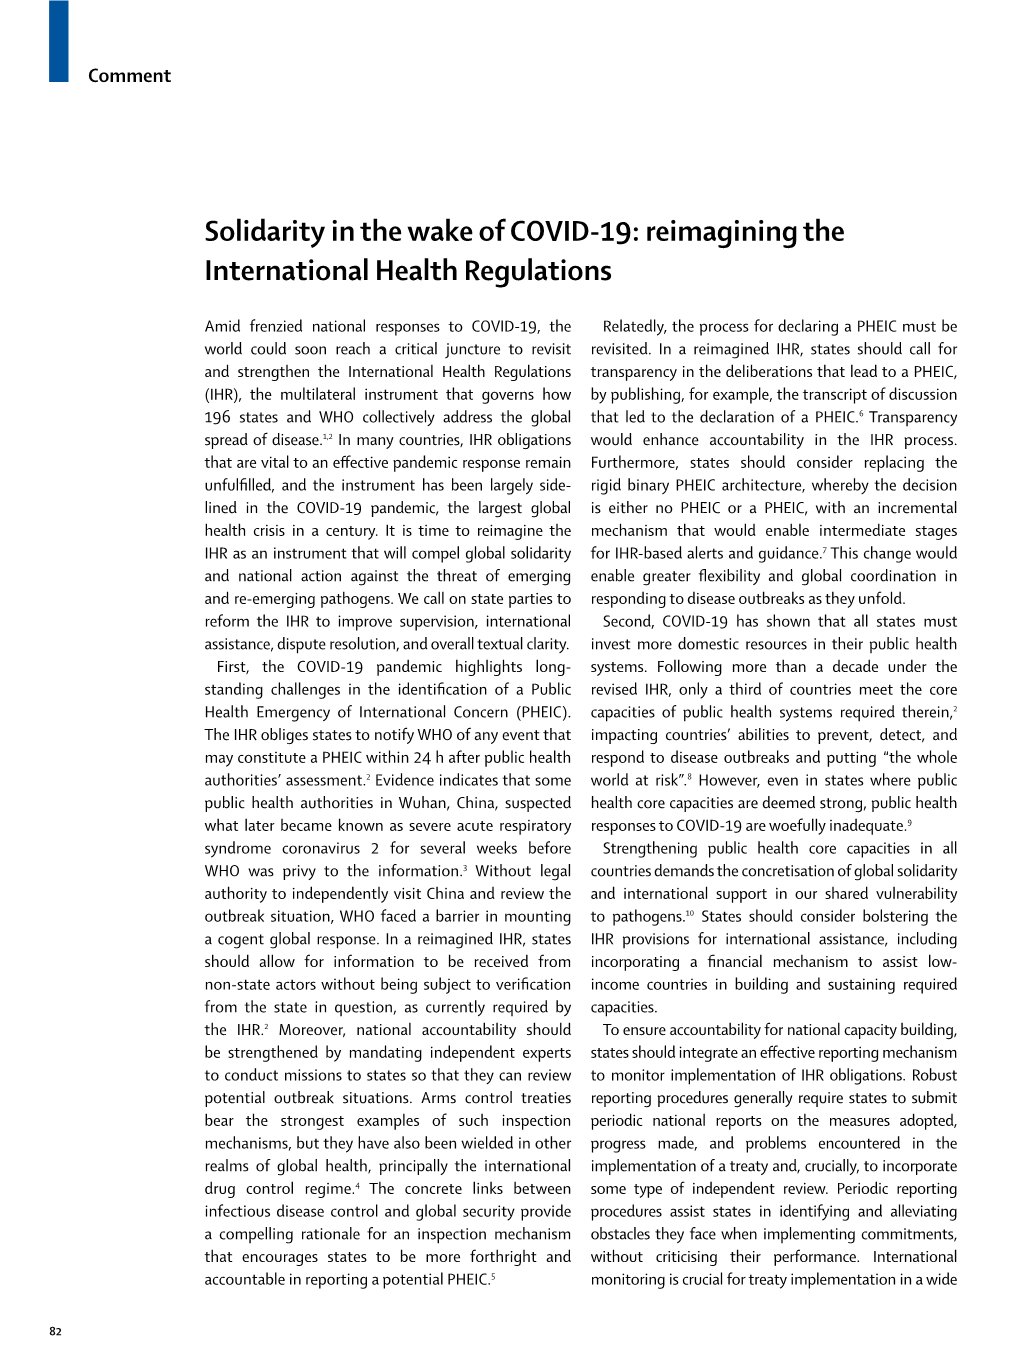 Solidarity in the Wake of COVID-19: Reimagining the International Health Regulations